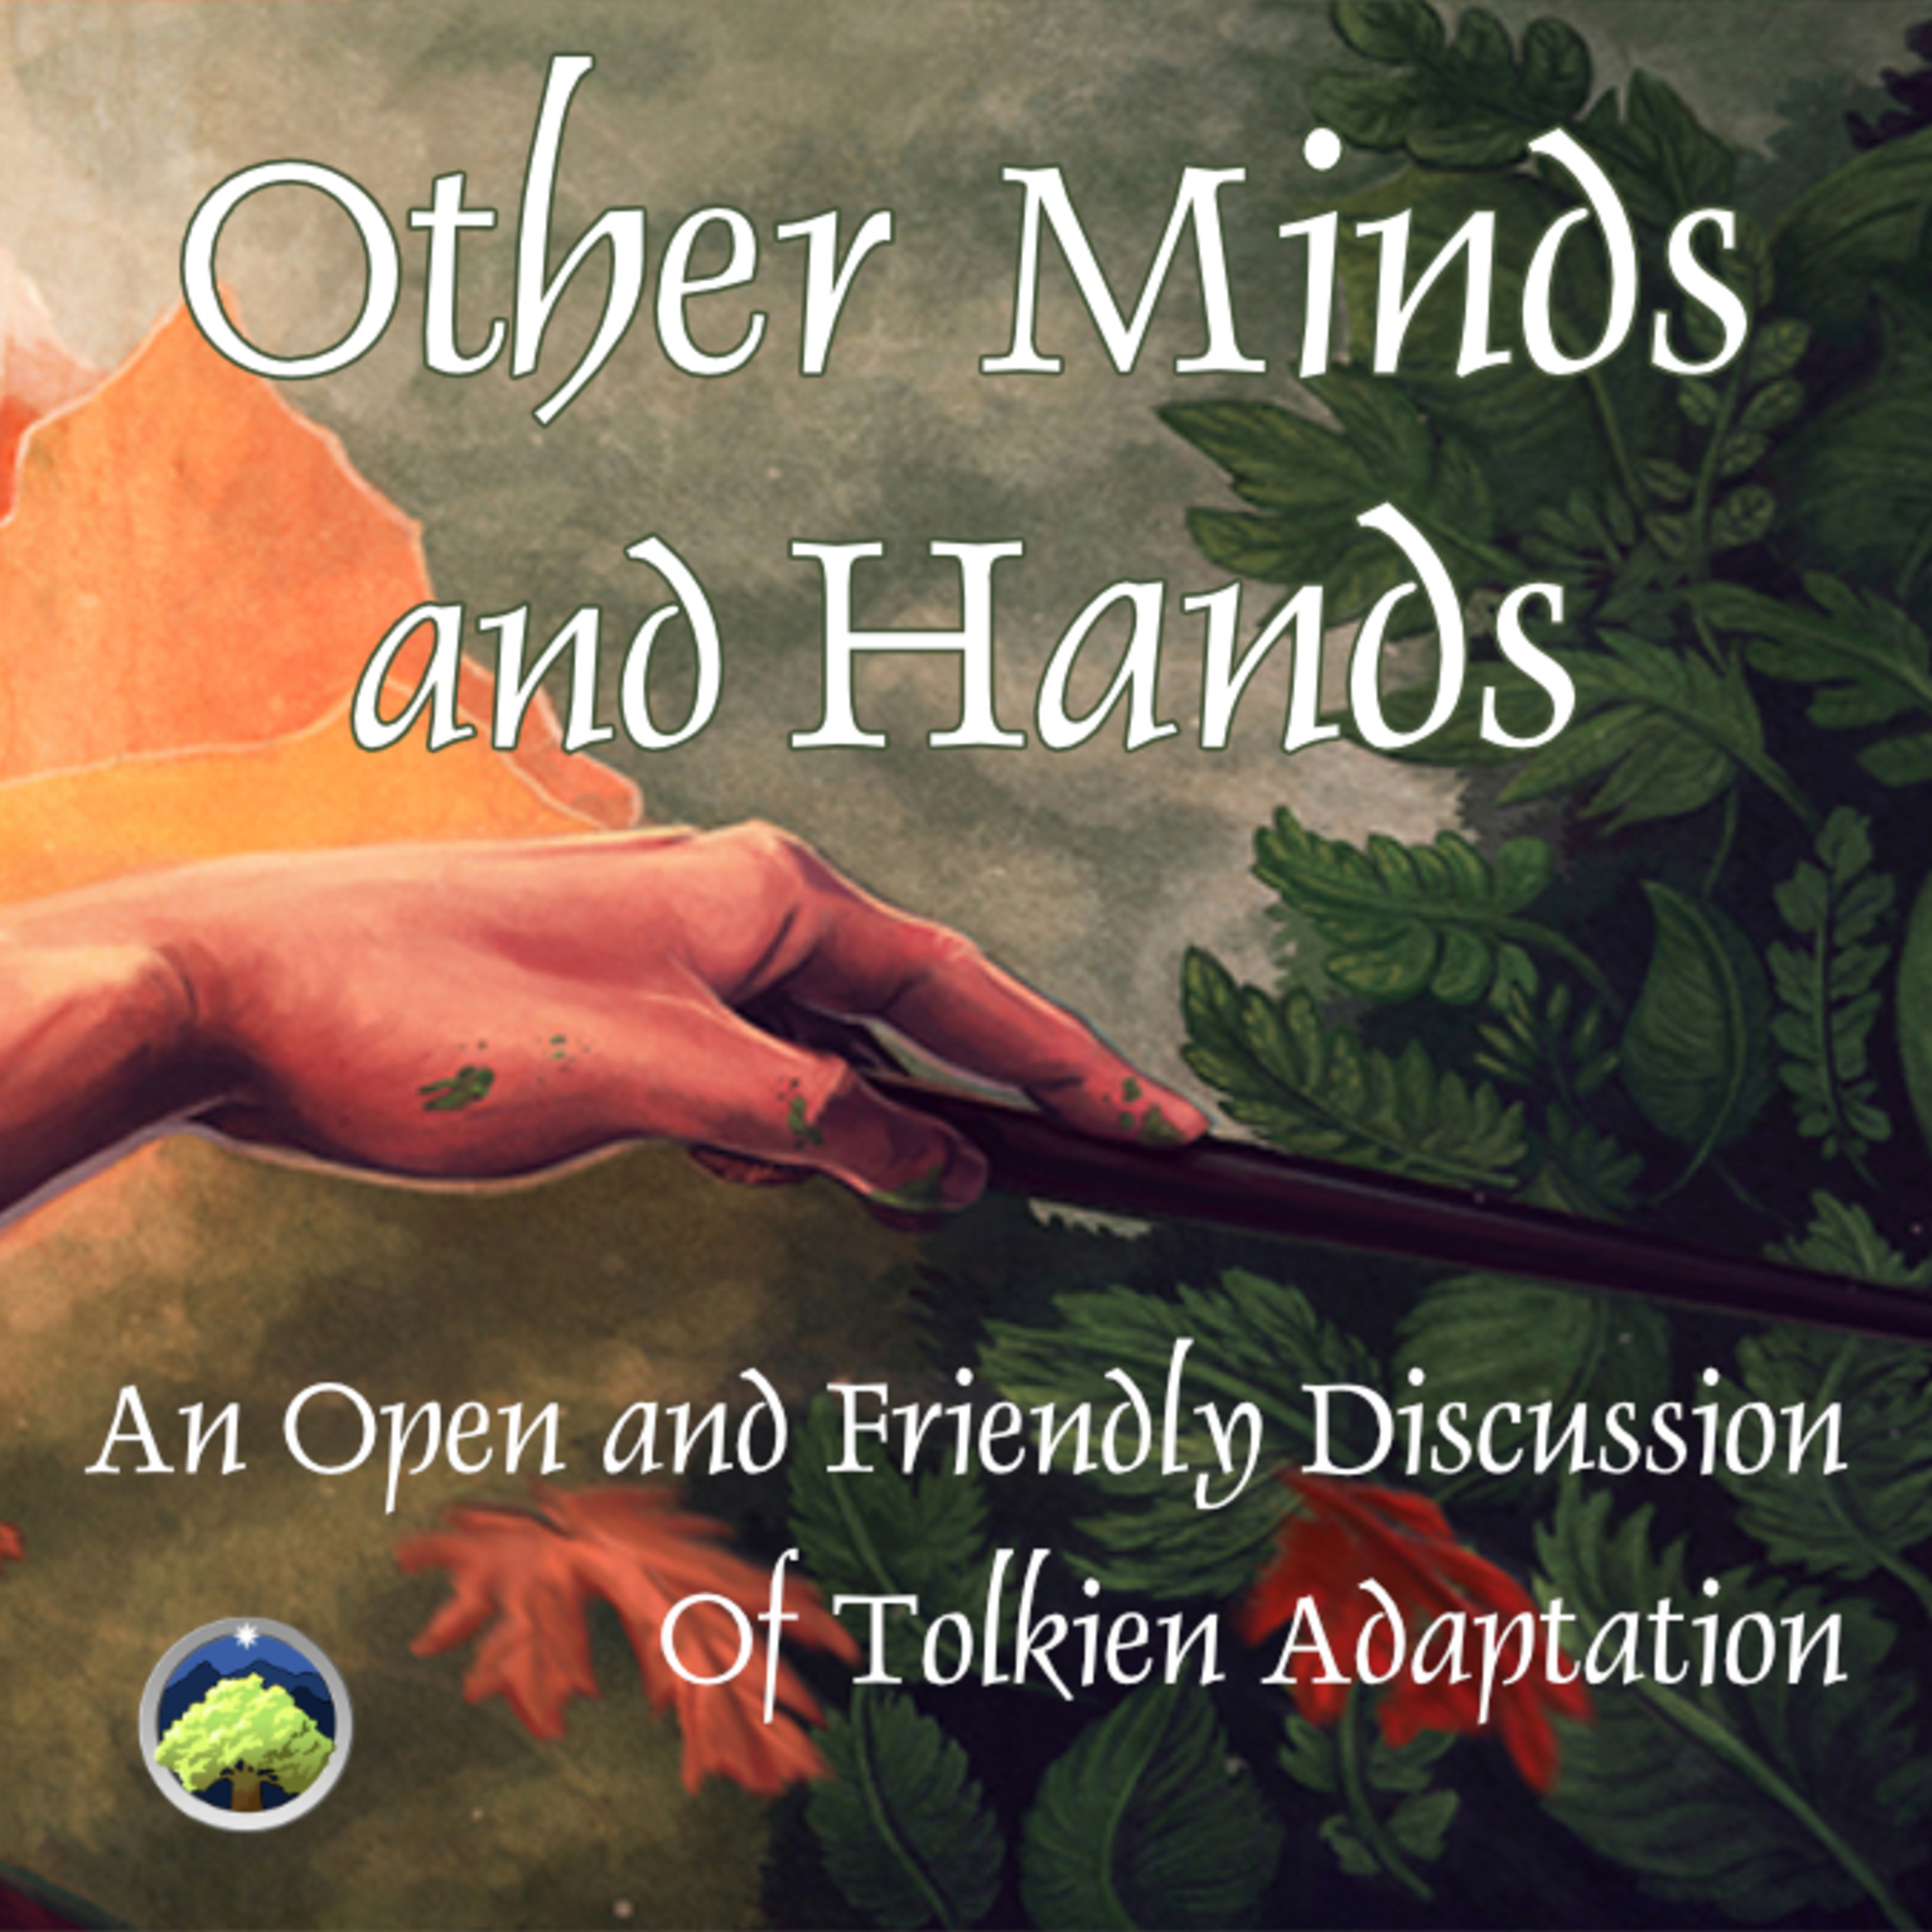 552: Other Minds and Hands, Episode 59